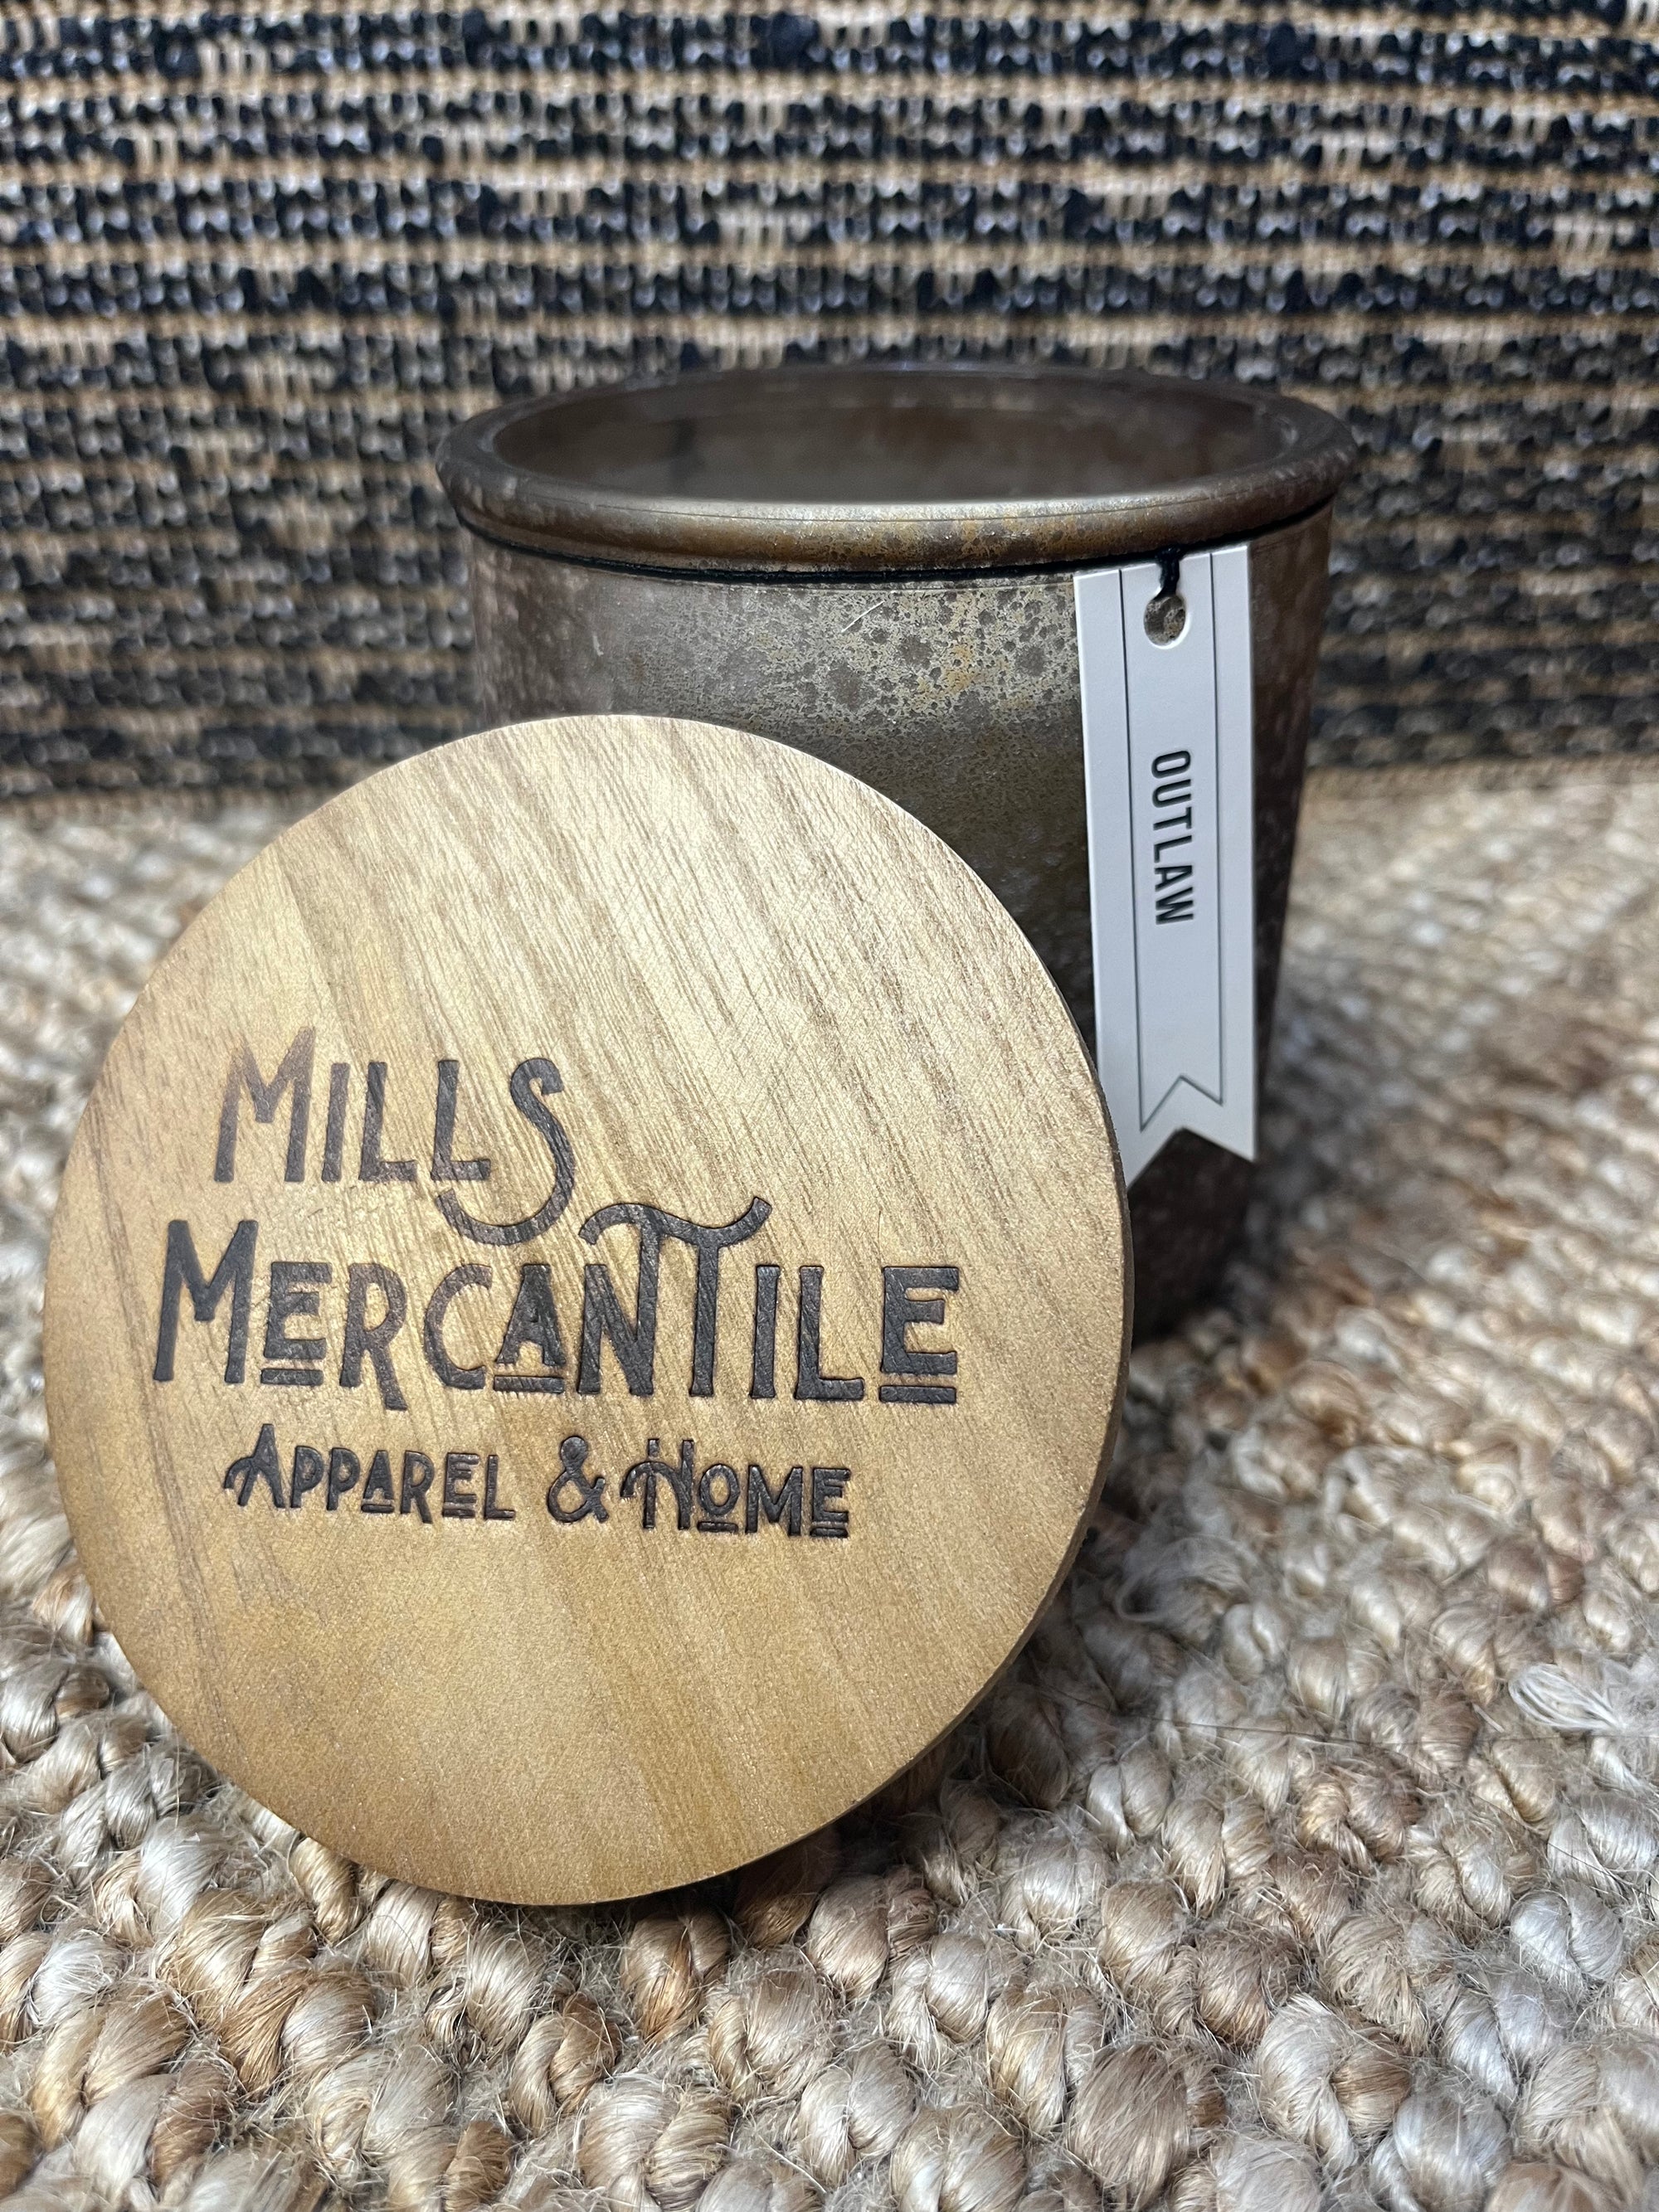 Outlaw Scent - Mills Mercantile Candle